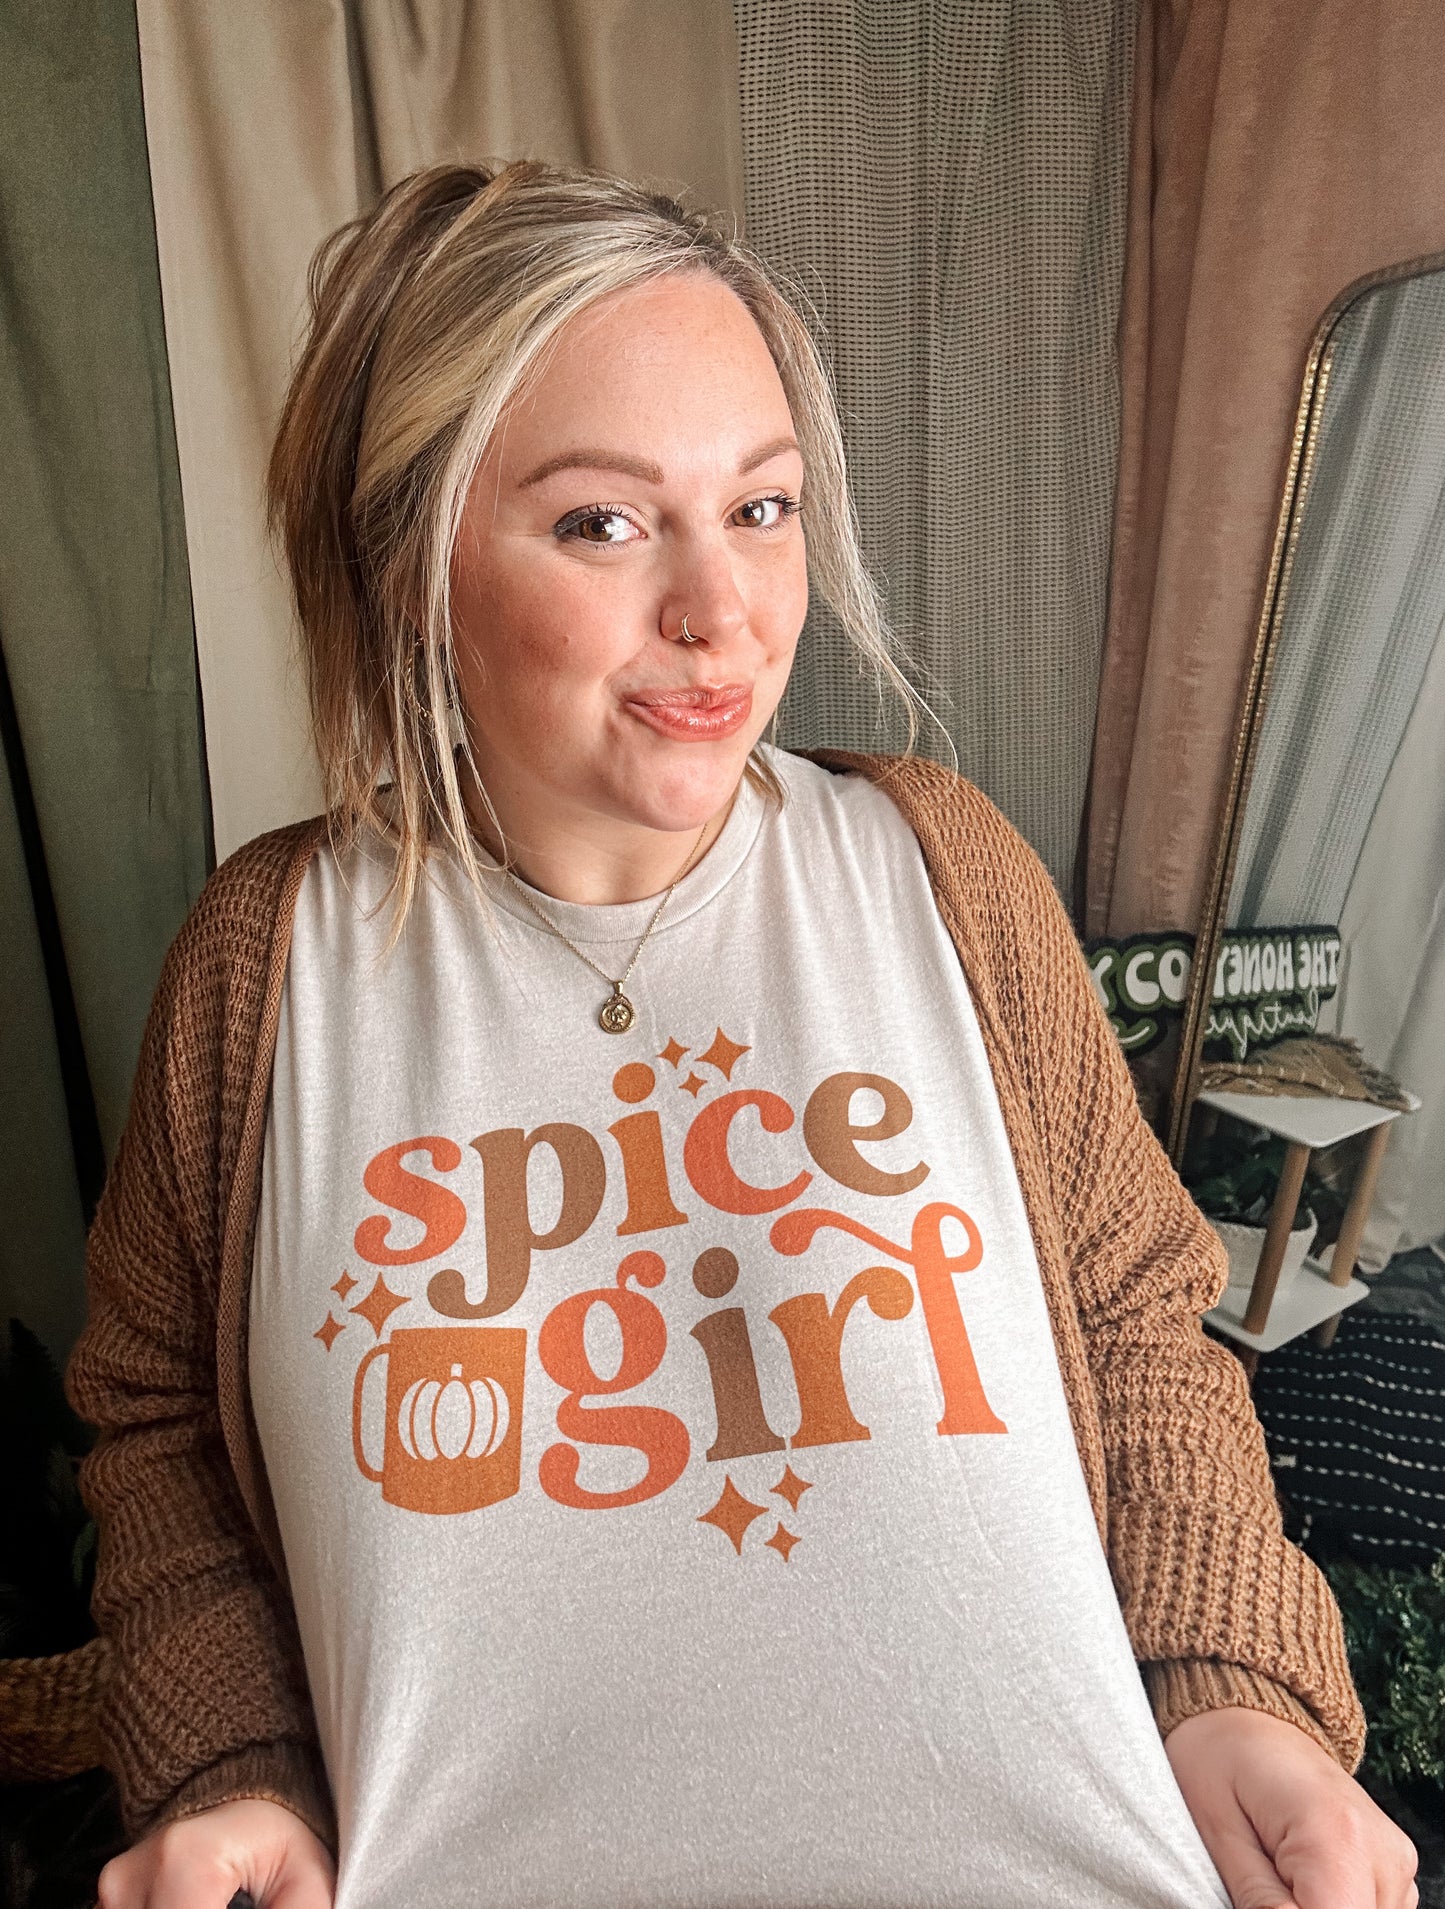 Spice Girl Fall Graphic Tee